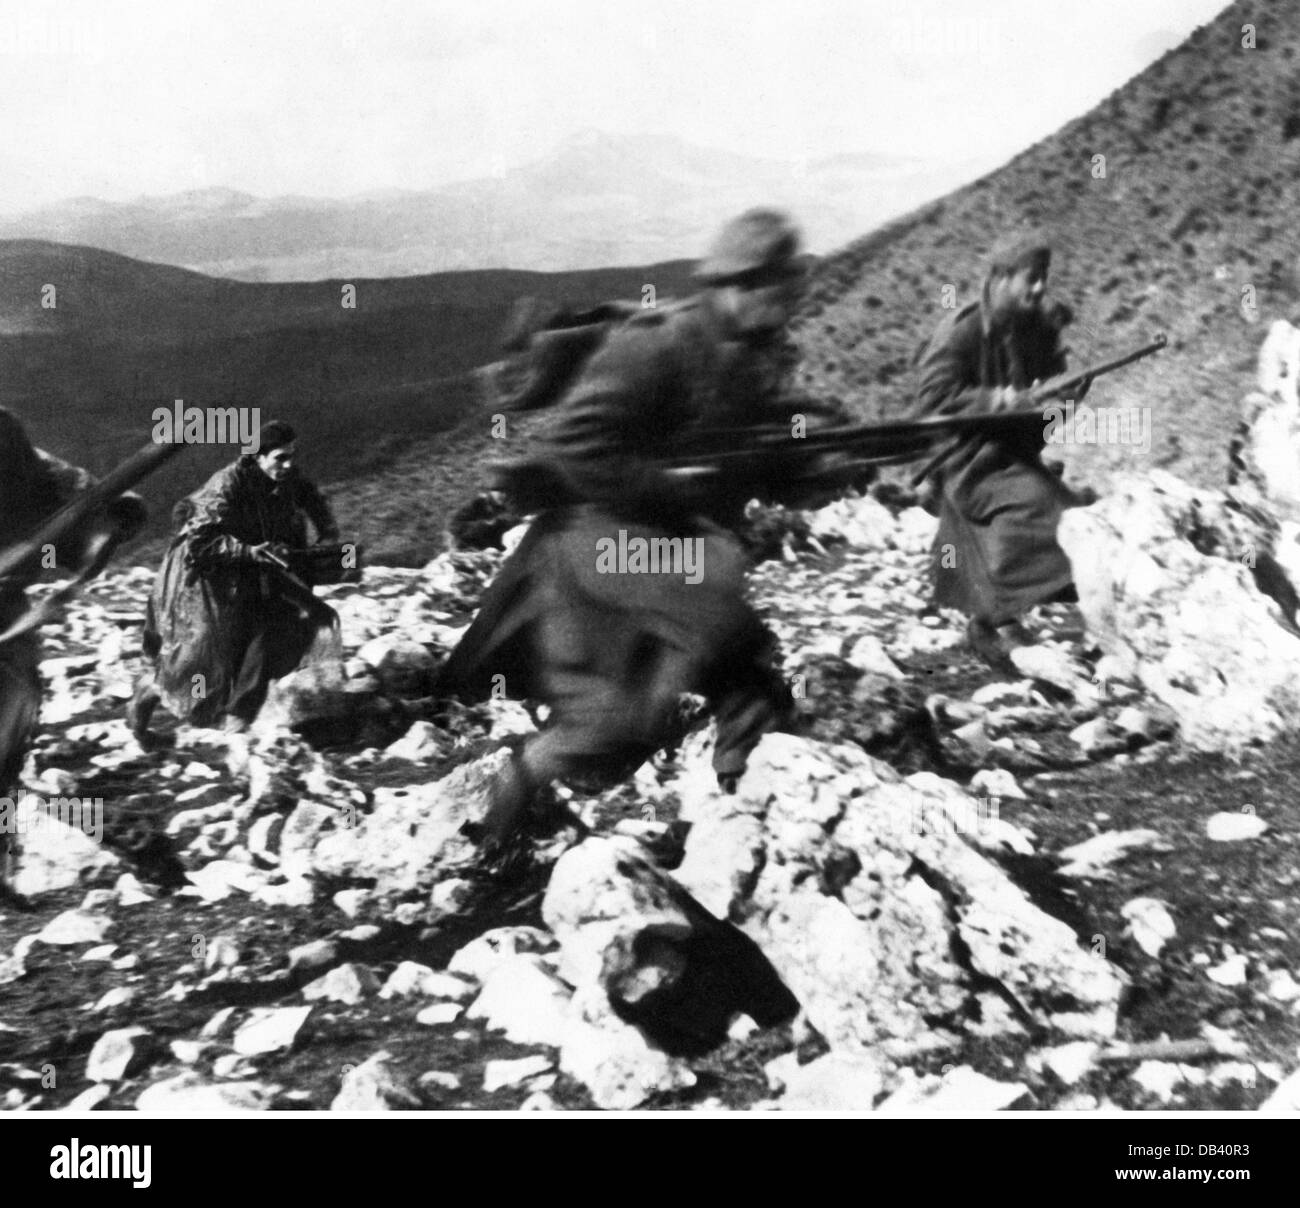 events, Greek Civil War 1946 - 1949, engagements at Konitzsa, government troops advancing, 1947, Greece Epirus, soldiers, stroming, Central Army, 1940s, 20th century, historic, historical, people, Additional-Rights-Clearences-Not Available Stock Photo